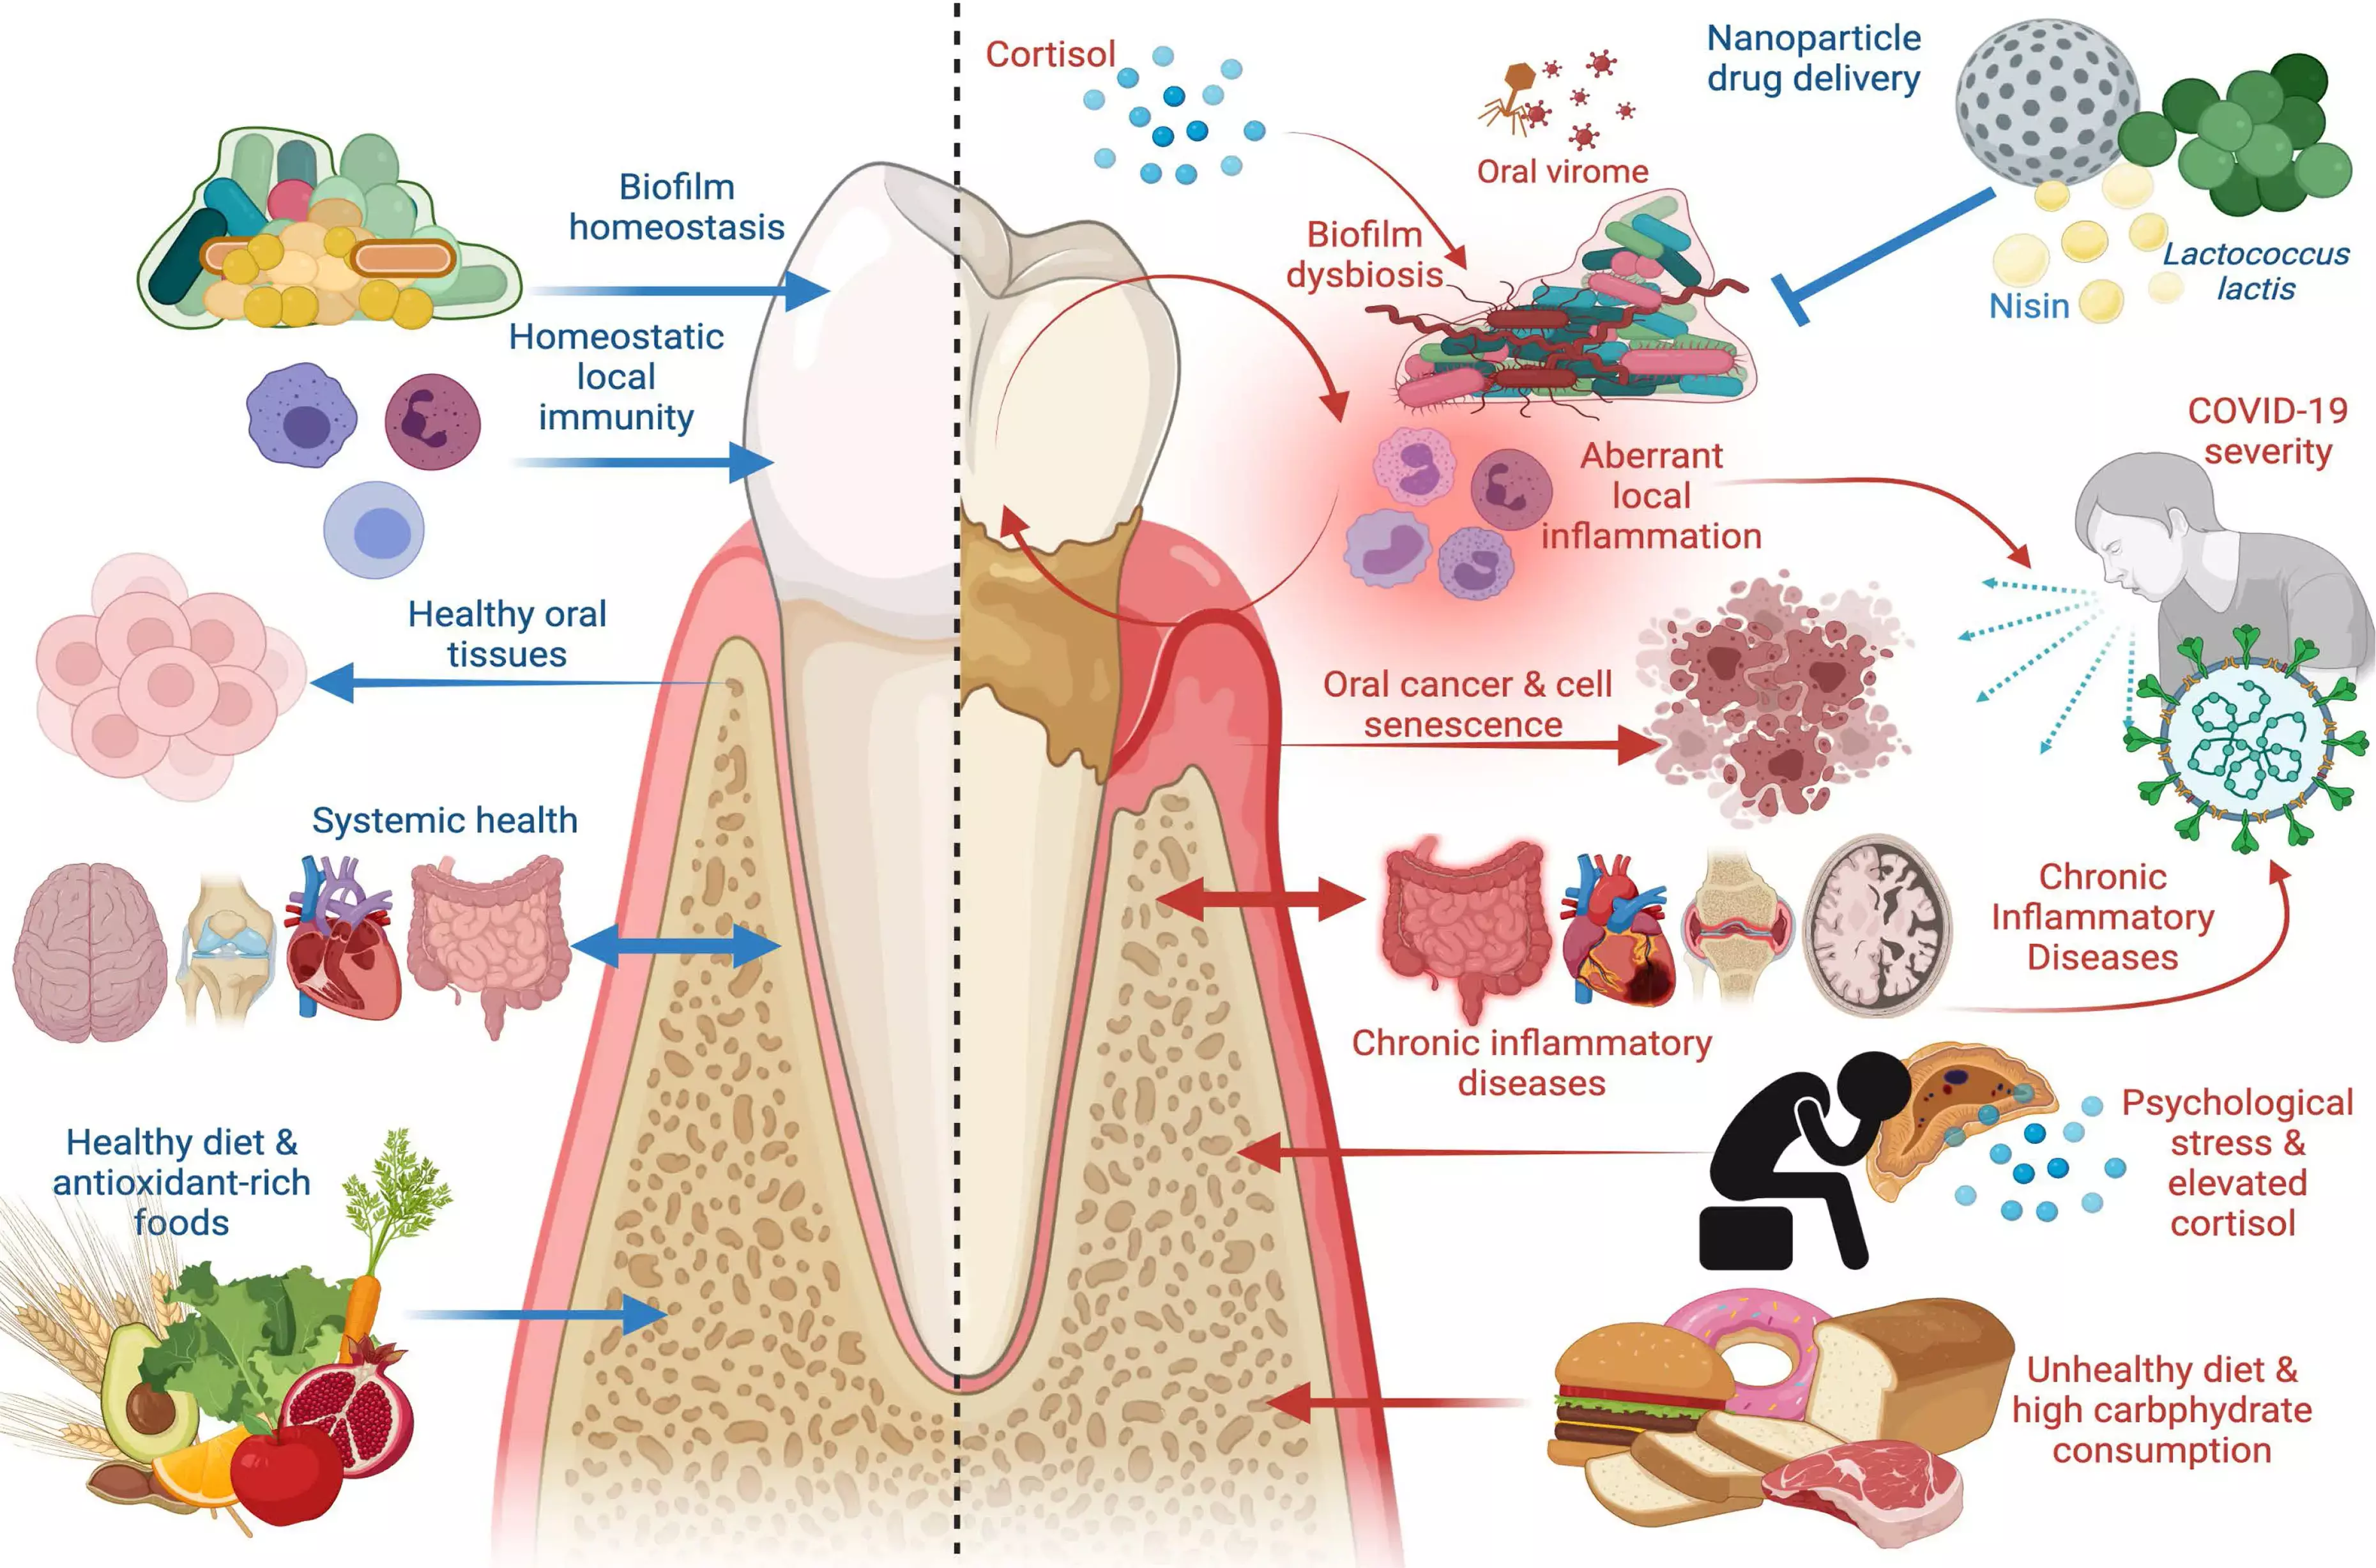 Elderly patients with terminal dentition due to stage IV periodontitis liable to have lower vegetable and micronutrient intake: Study